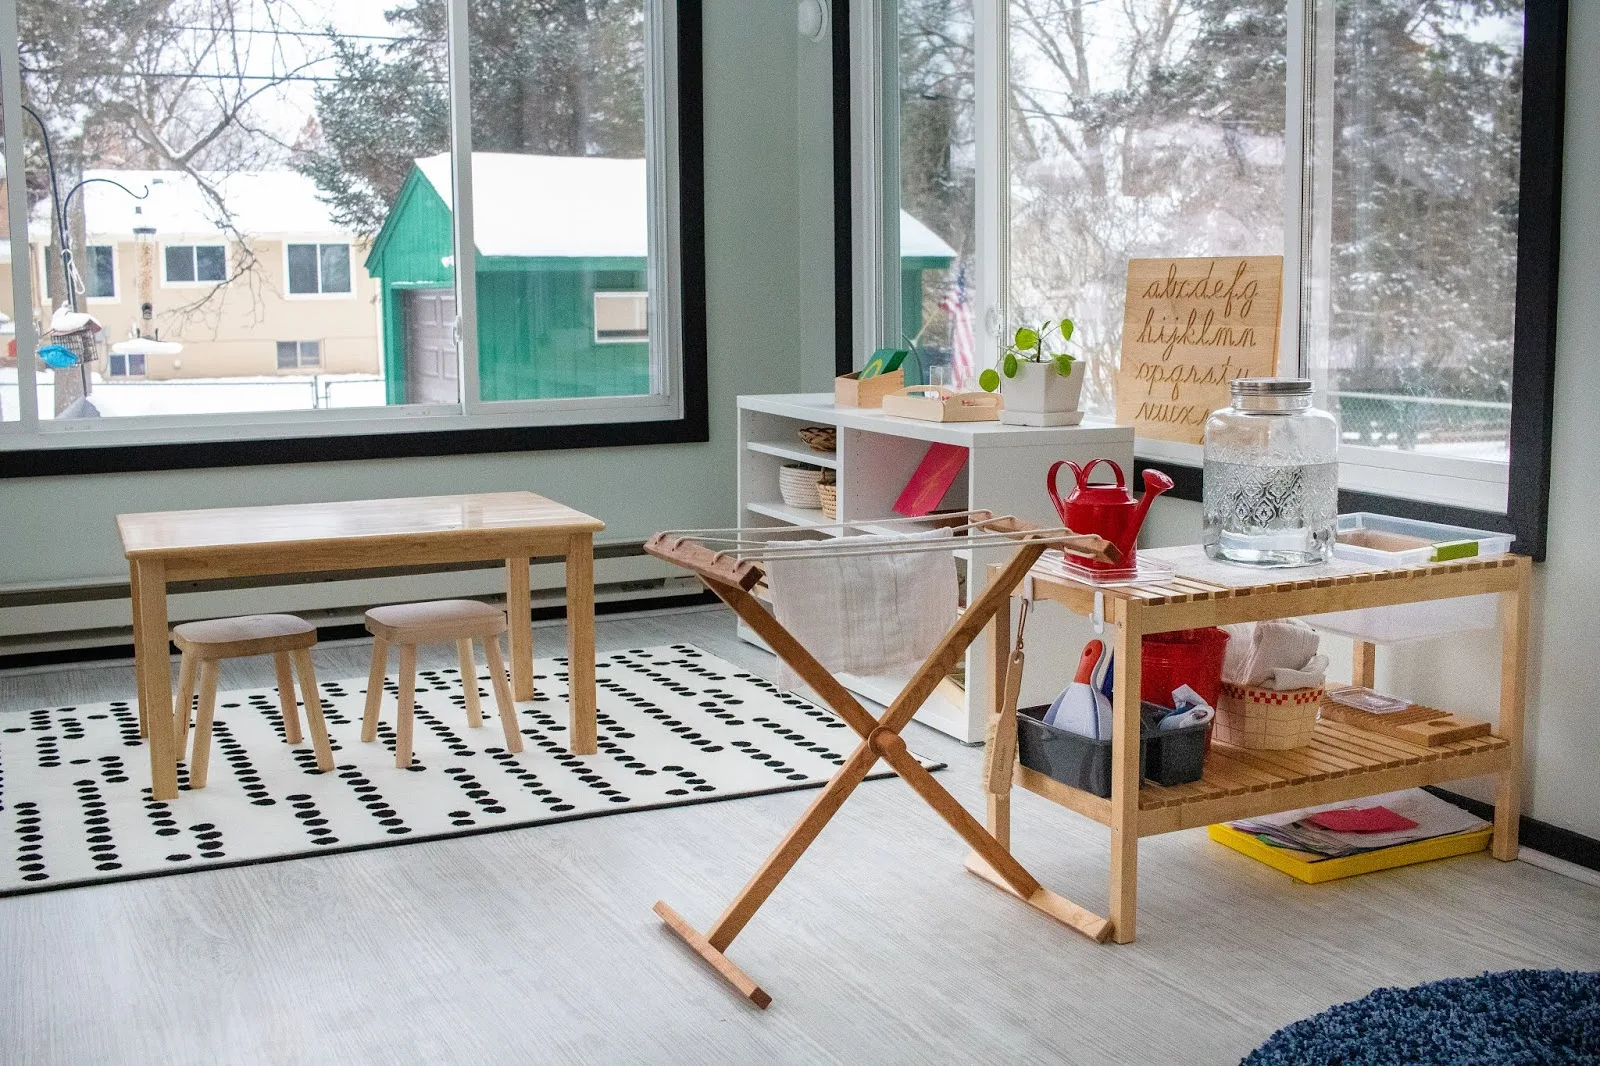 A look at our multi-use, multi-age Montessori playroom, including art area and Montessori baby space.